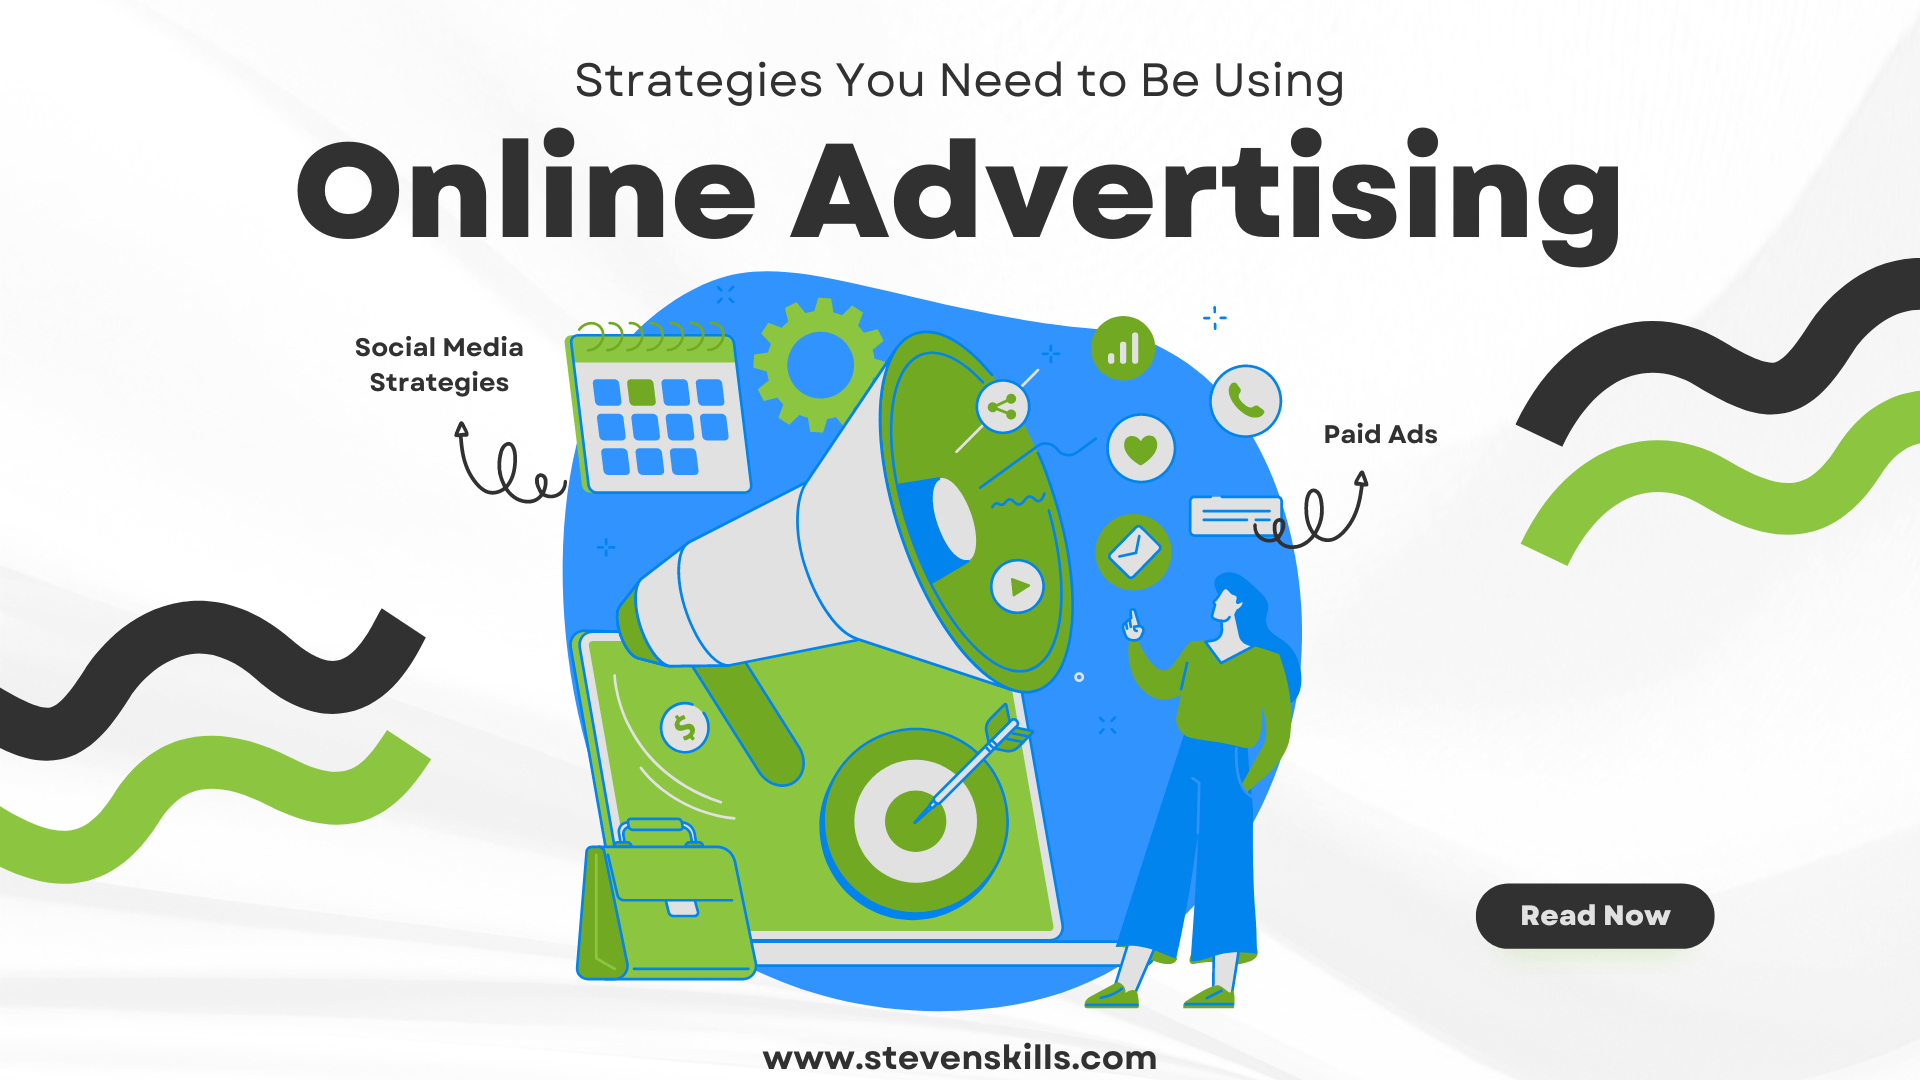 Online Advertising Strategies You Need to Be Using NOW